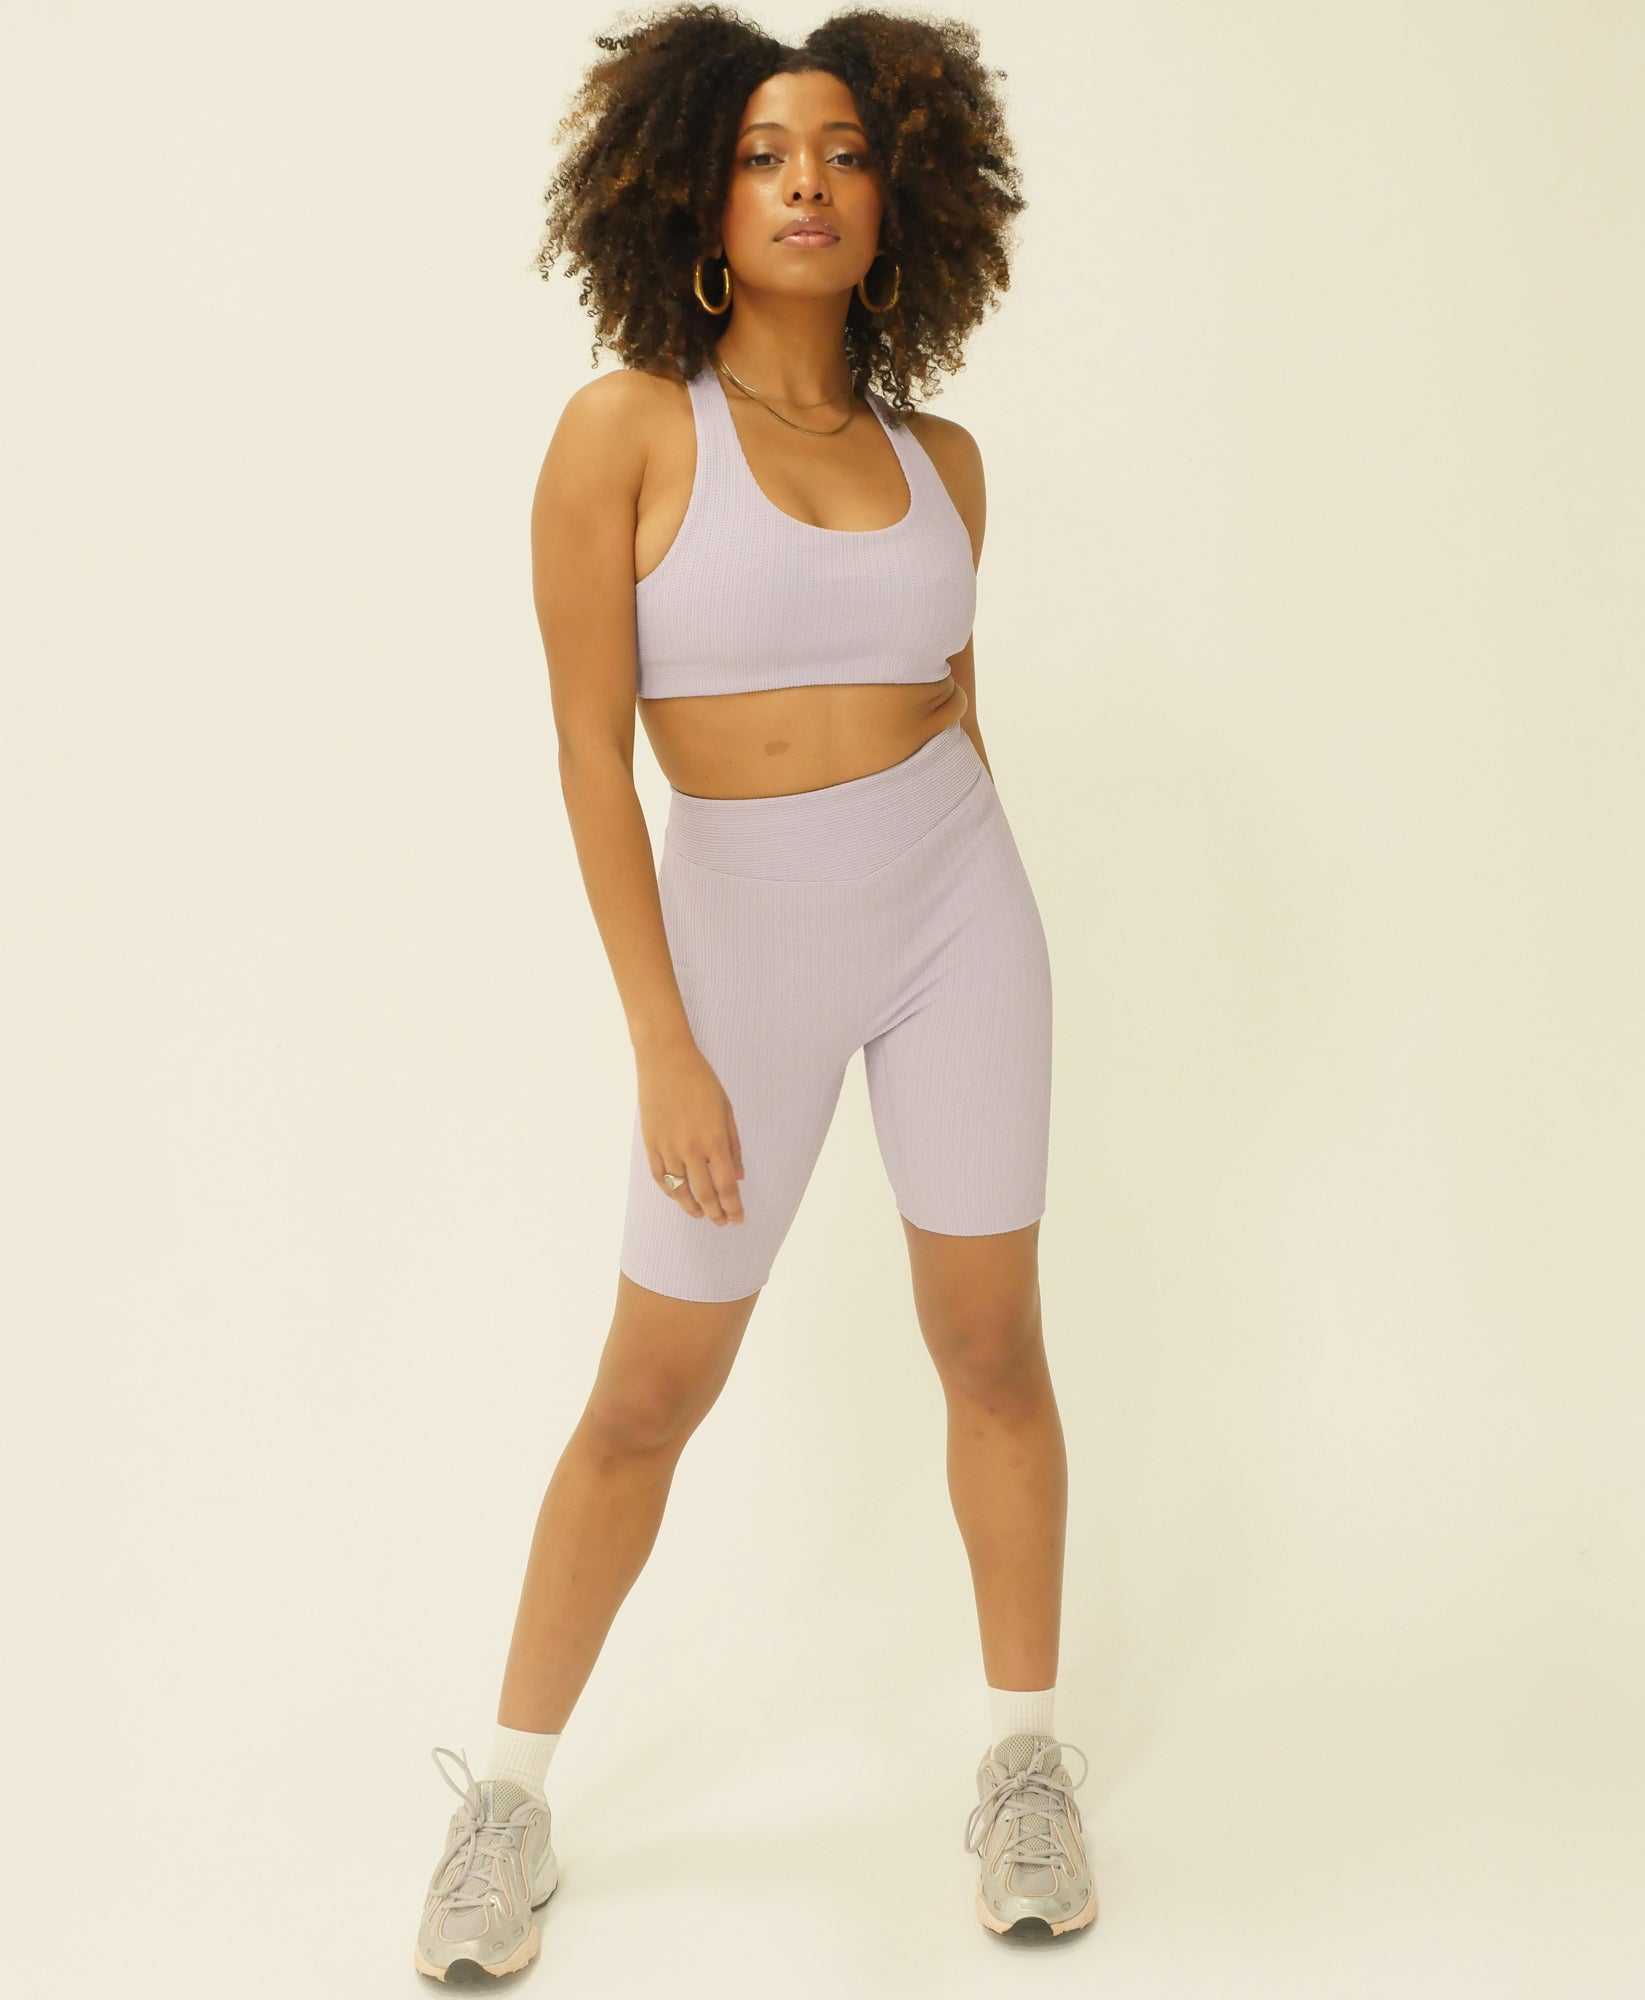 Shop All Wear One's At Women's Activewear